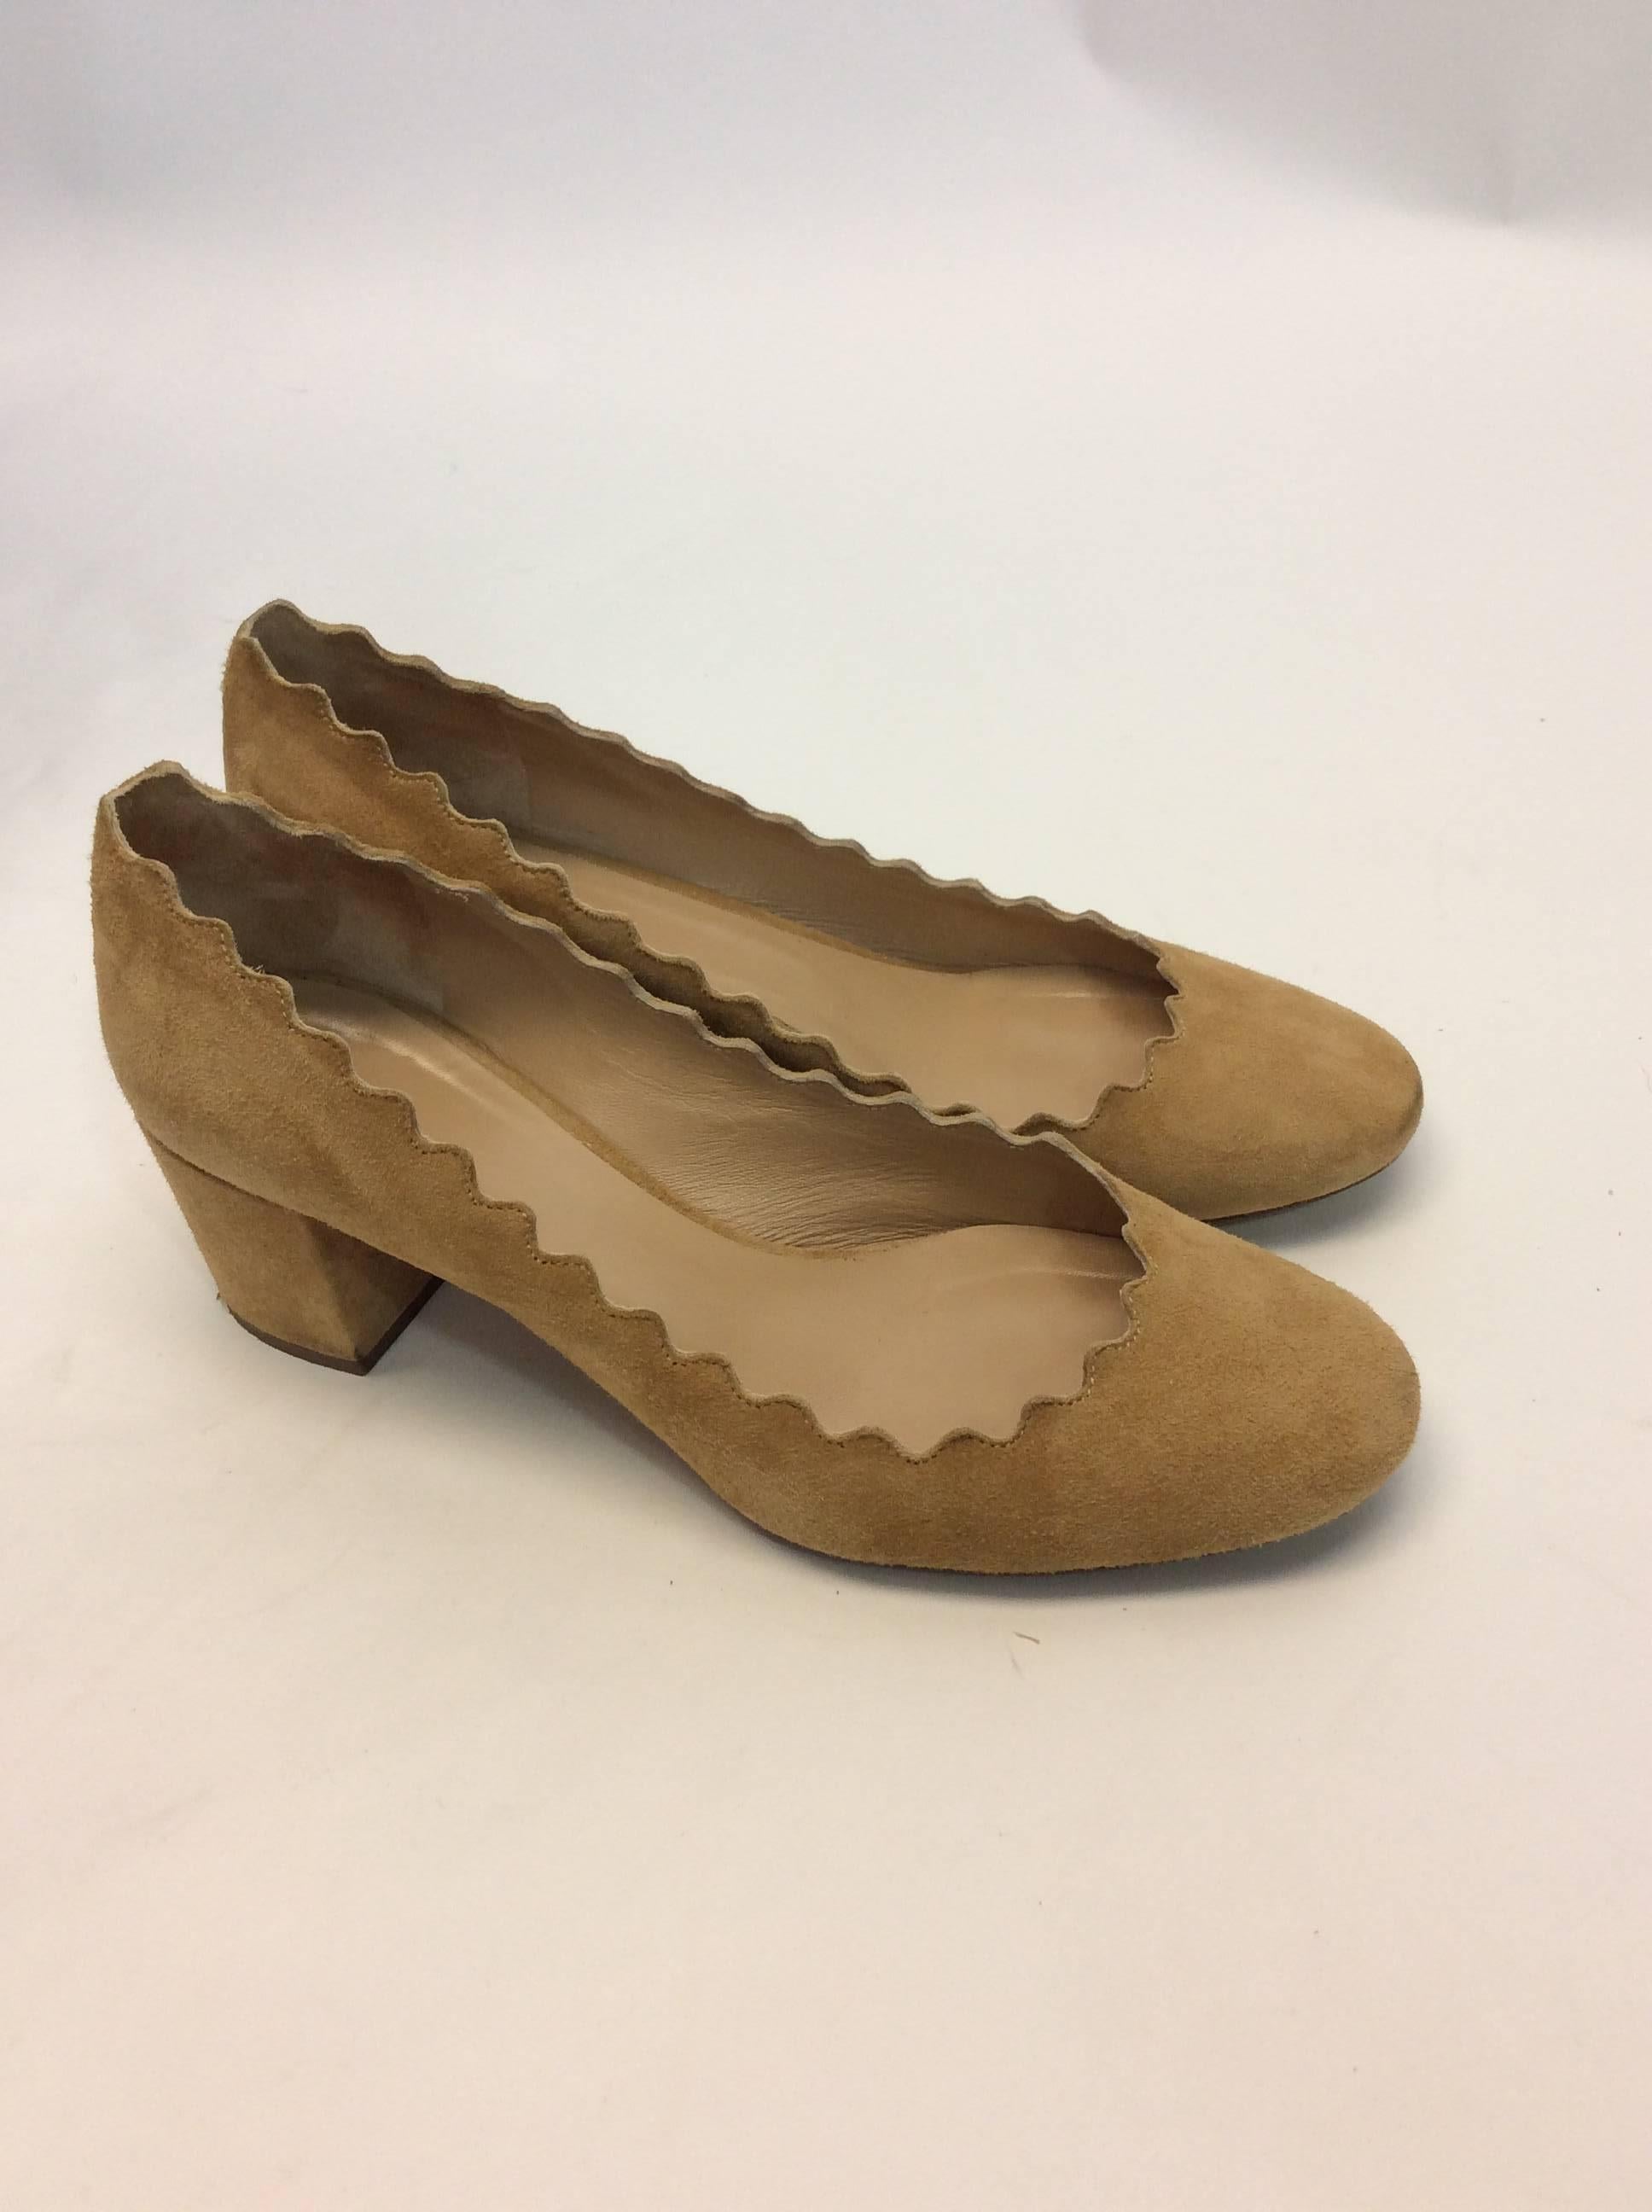 Chloe Suede Scalloped Heels In Excellent Condition For Sale In Narberth, PA